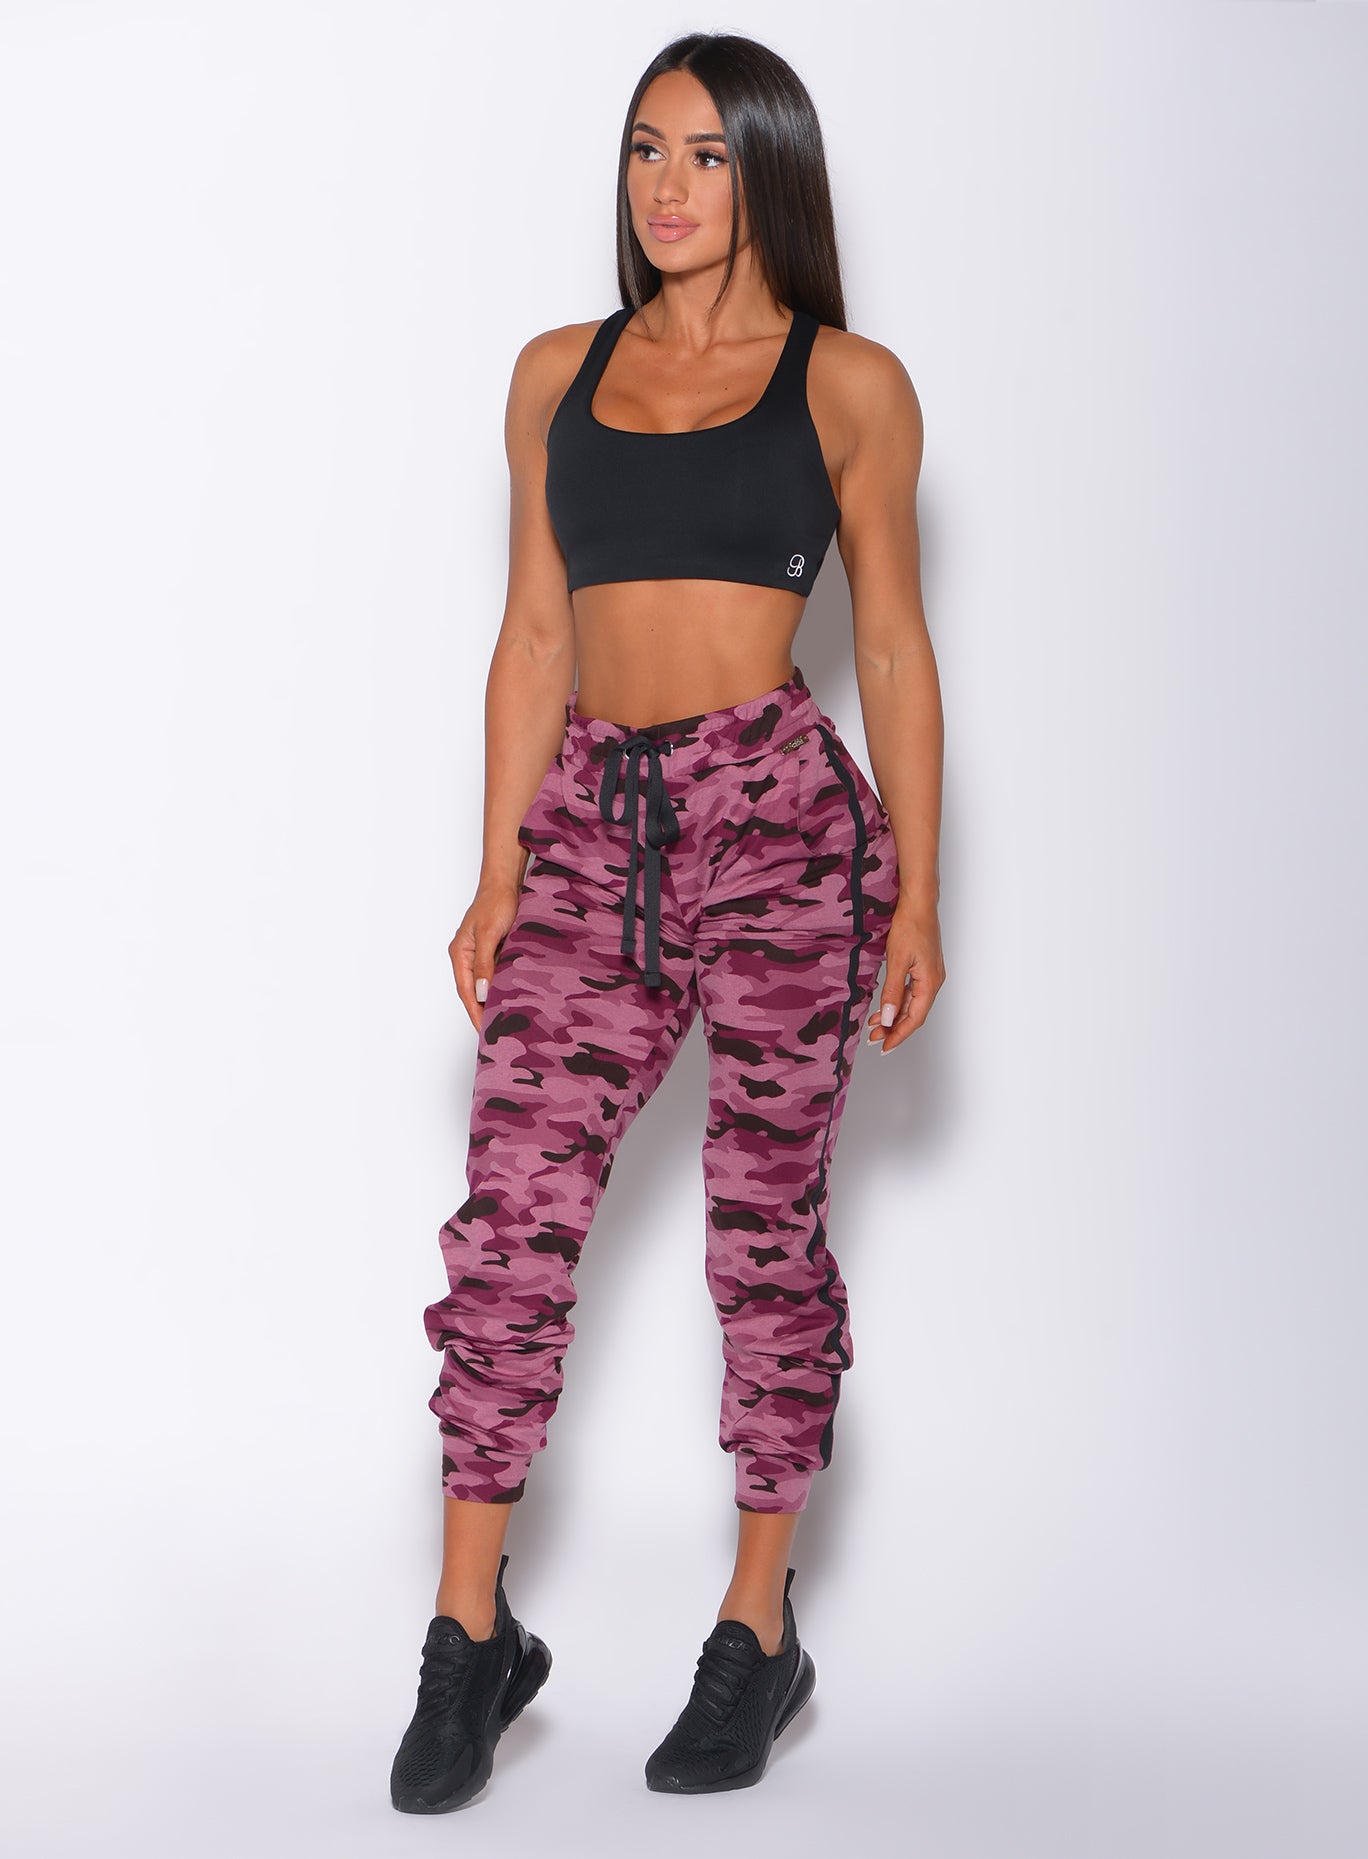 Front profile view of a model wearing our dream joggers in Purple Power Camo color and a matching black bombshell sports bra 